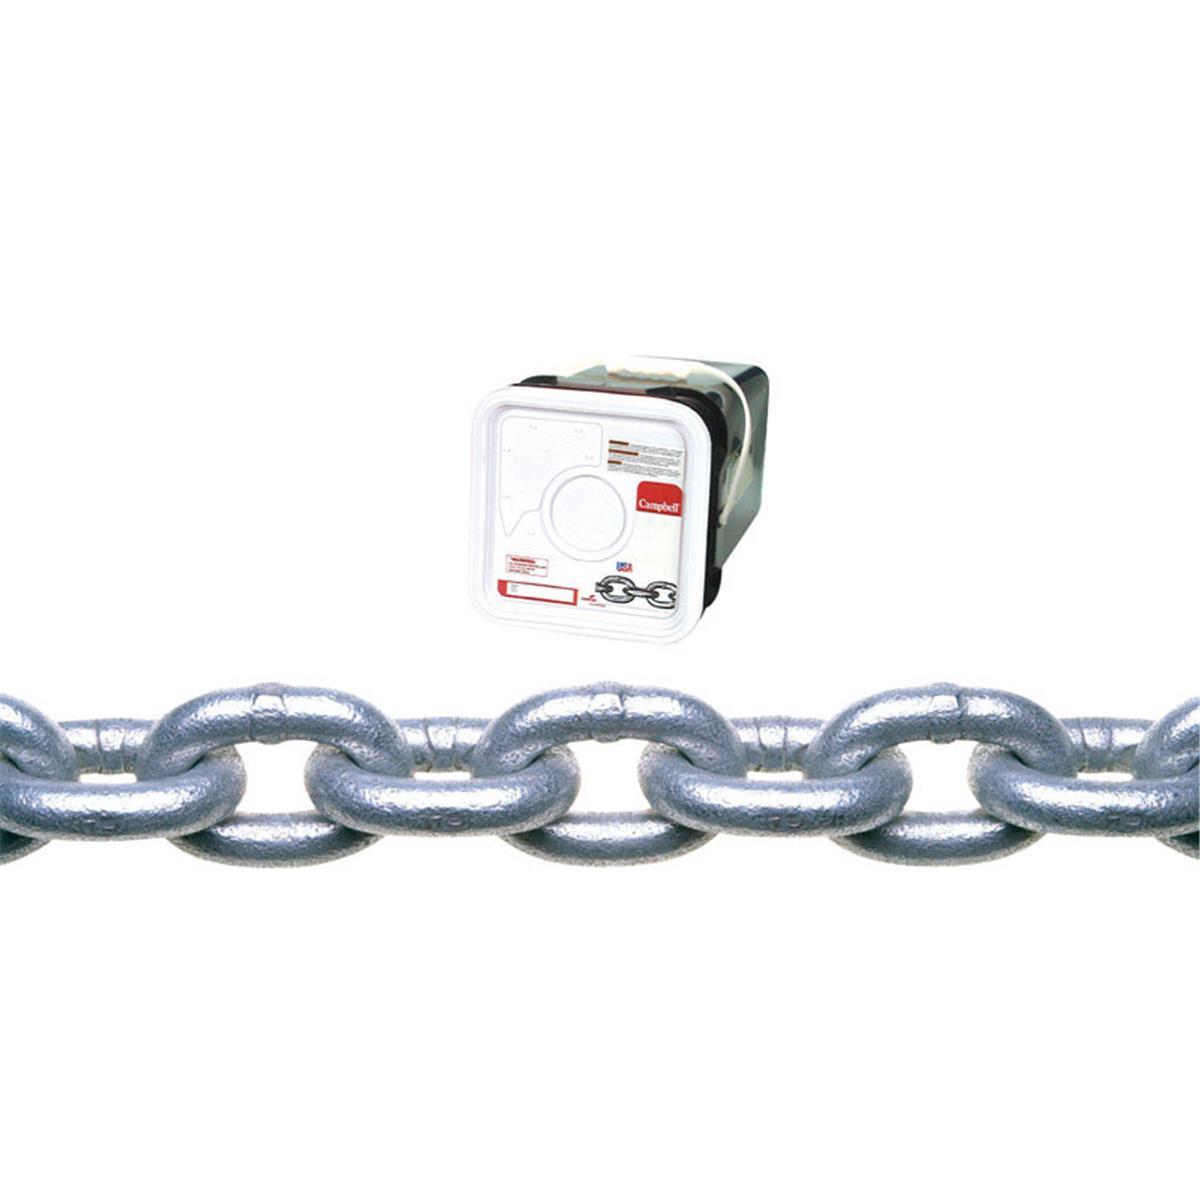 Picture of Apex Tool Group 143436 0.25 in. x 100 ft. Chain Proof Galvanized